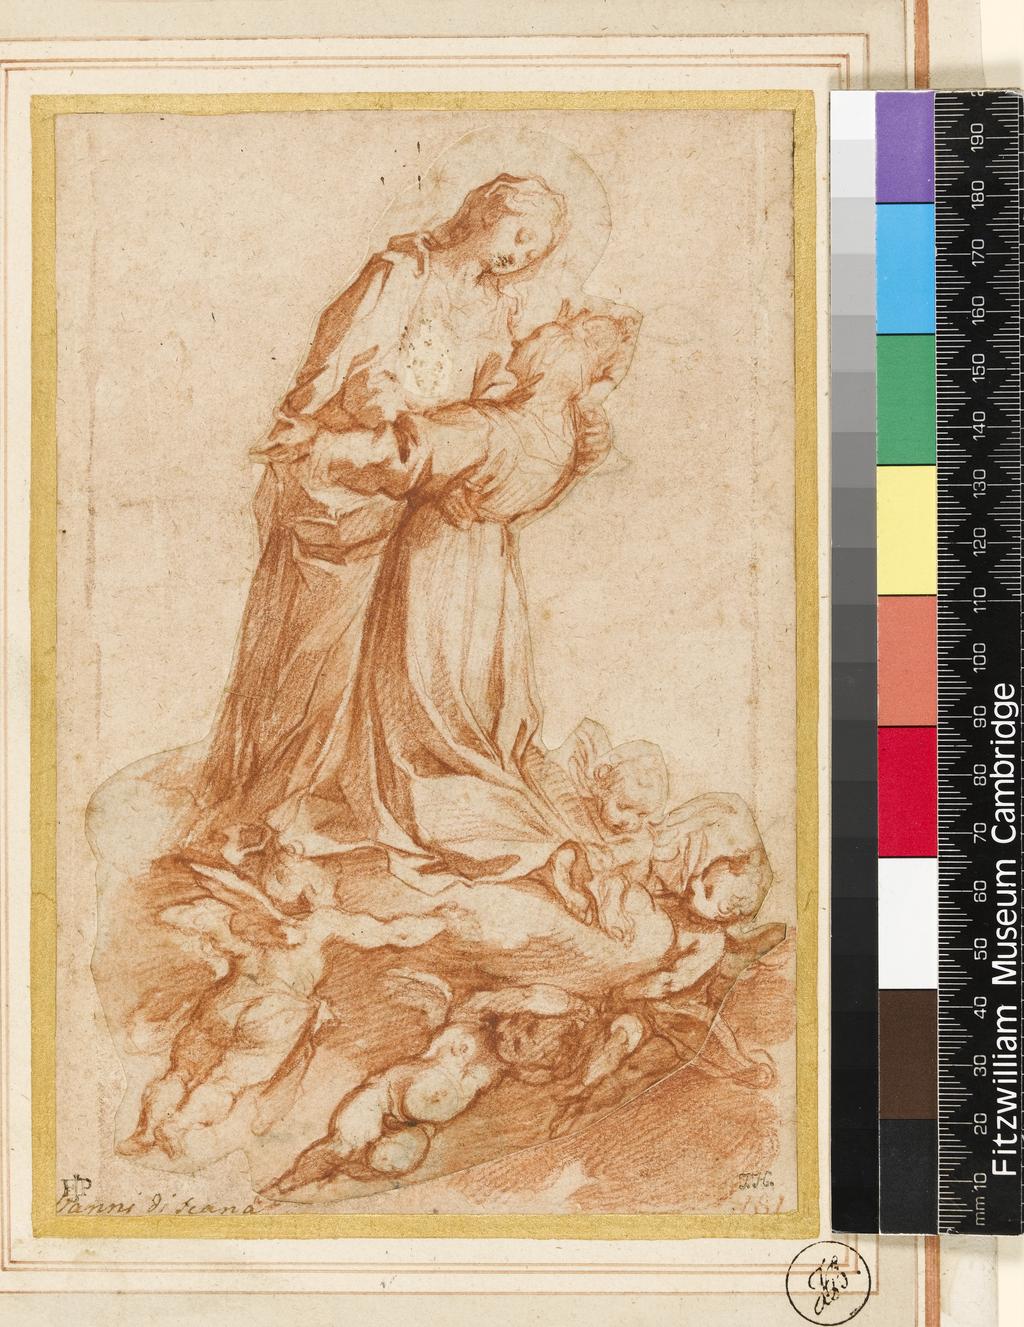 An image of Title/s: The Assumption of St. Catherine of Siena Maker/s: Vanni, Francesco (draughtsman) [ULAN info: Italian artist, 1563/5-1610]Technique Description: red chalk and red wash on paper Dimensions: height: 192 mm, width: 128 mm